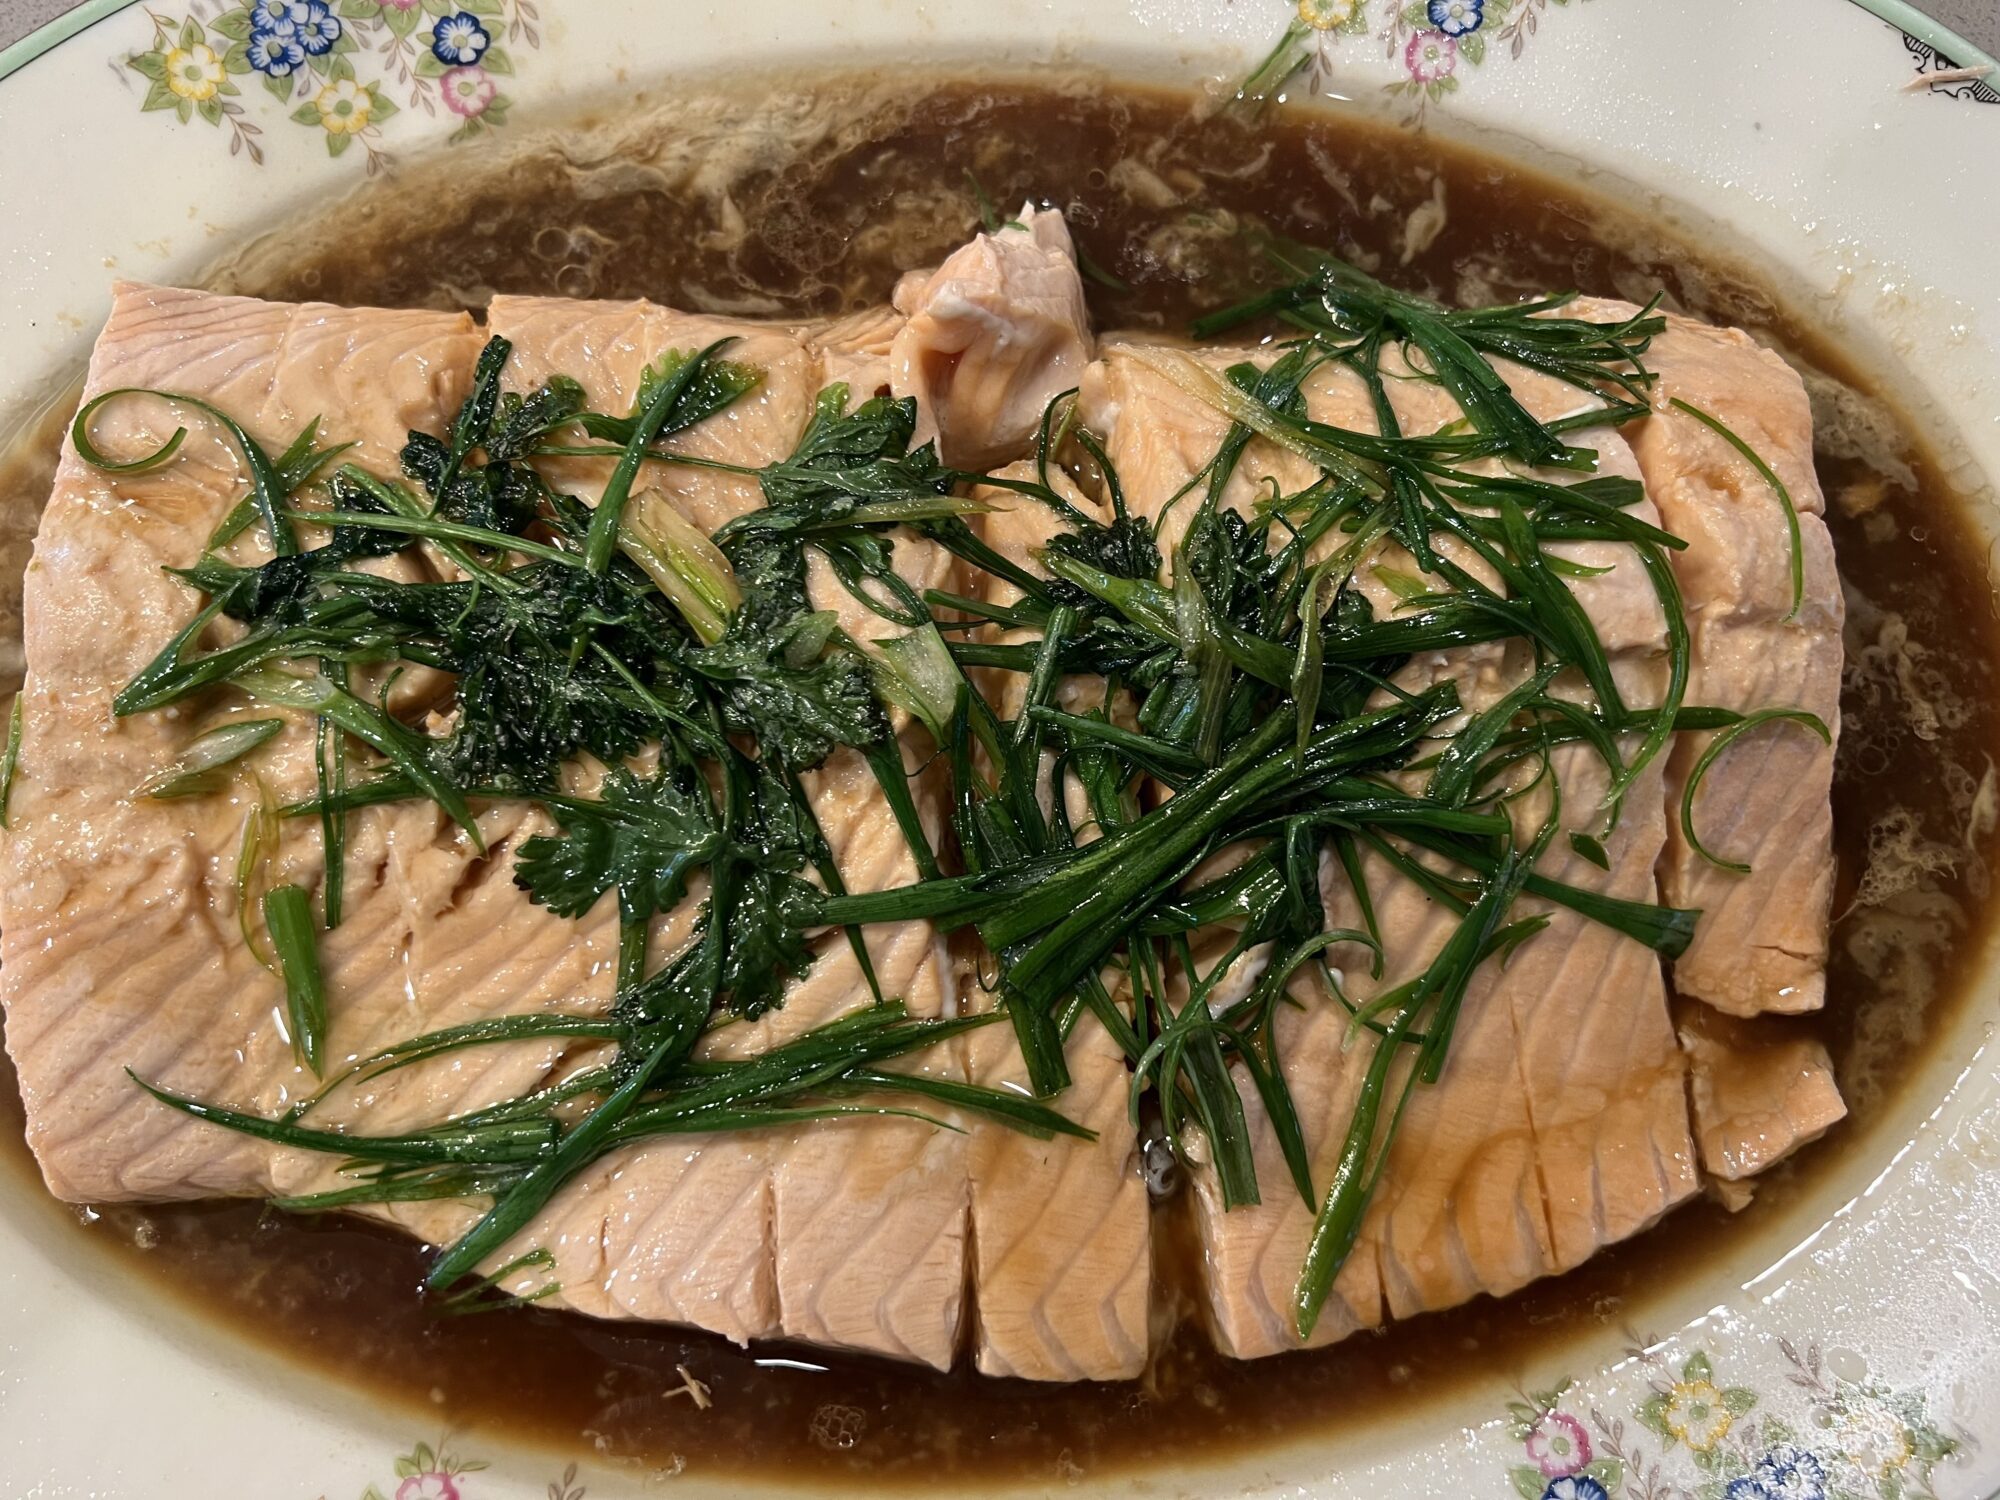 Boiled salmon and TCM